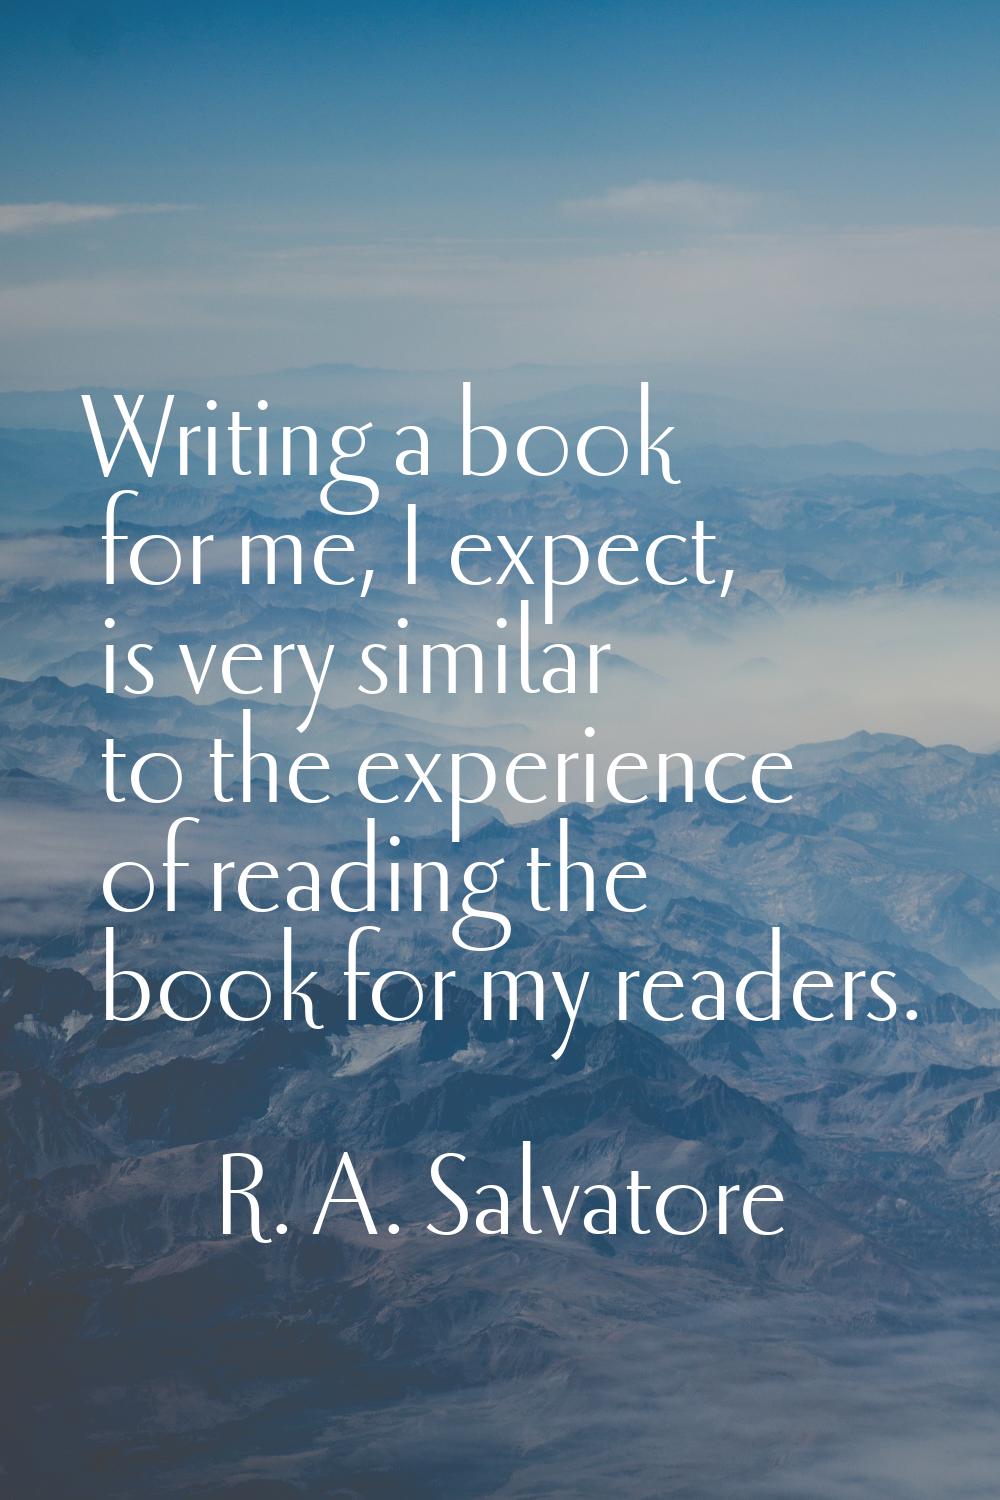 Writing a book for me, I expect, is very similar to the experience of reading the book for my reade